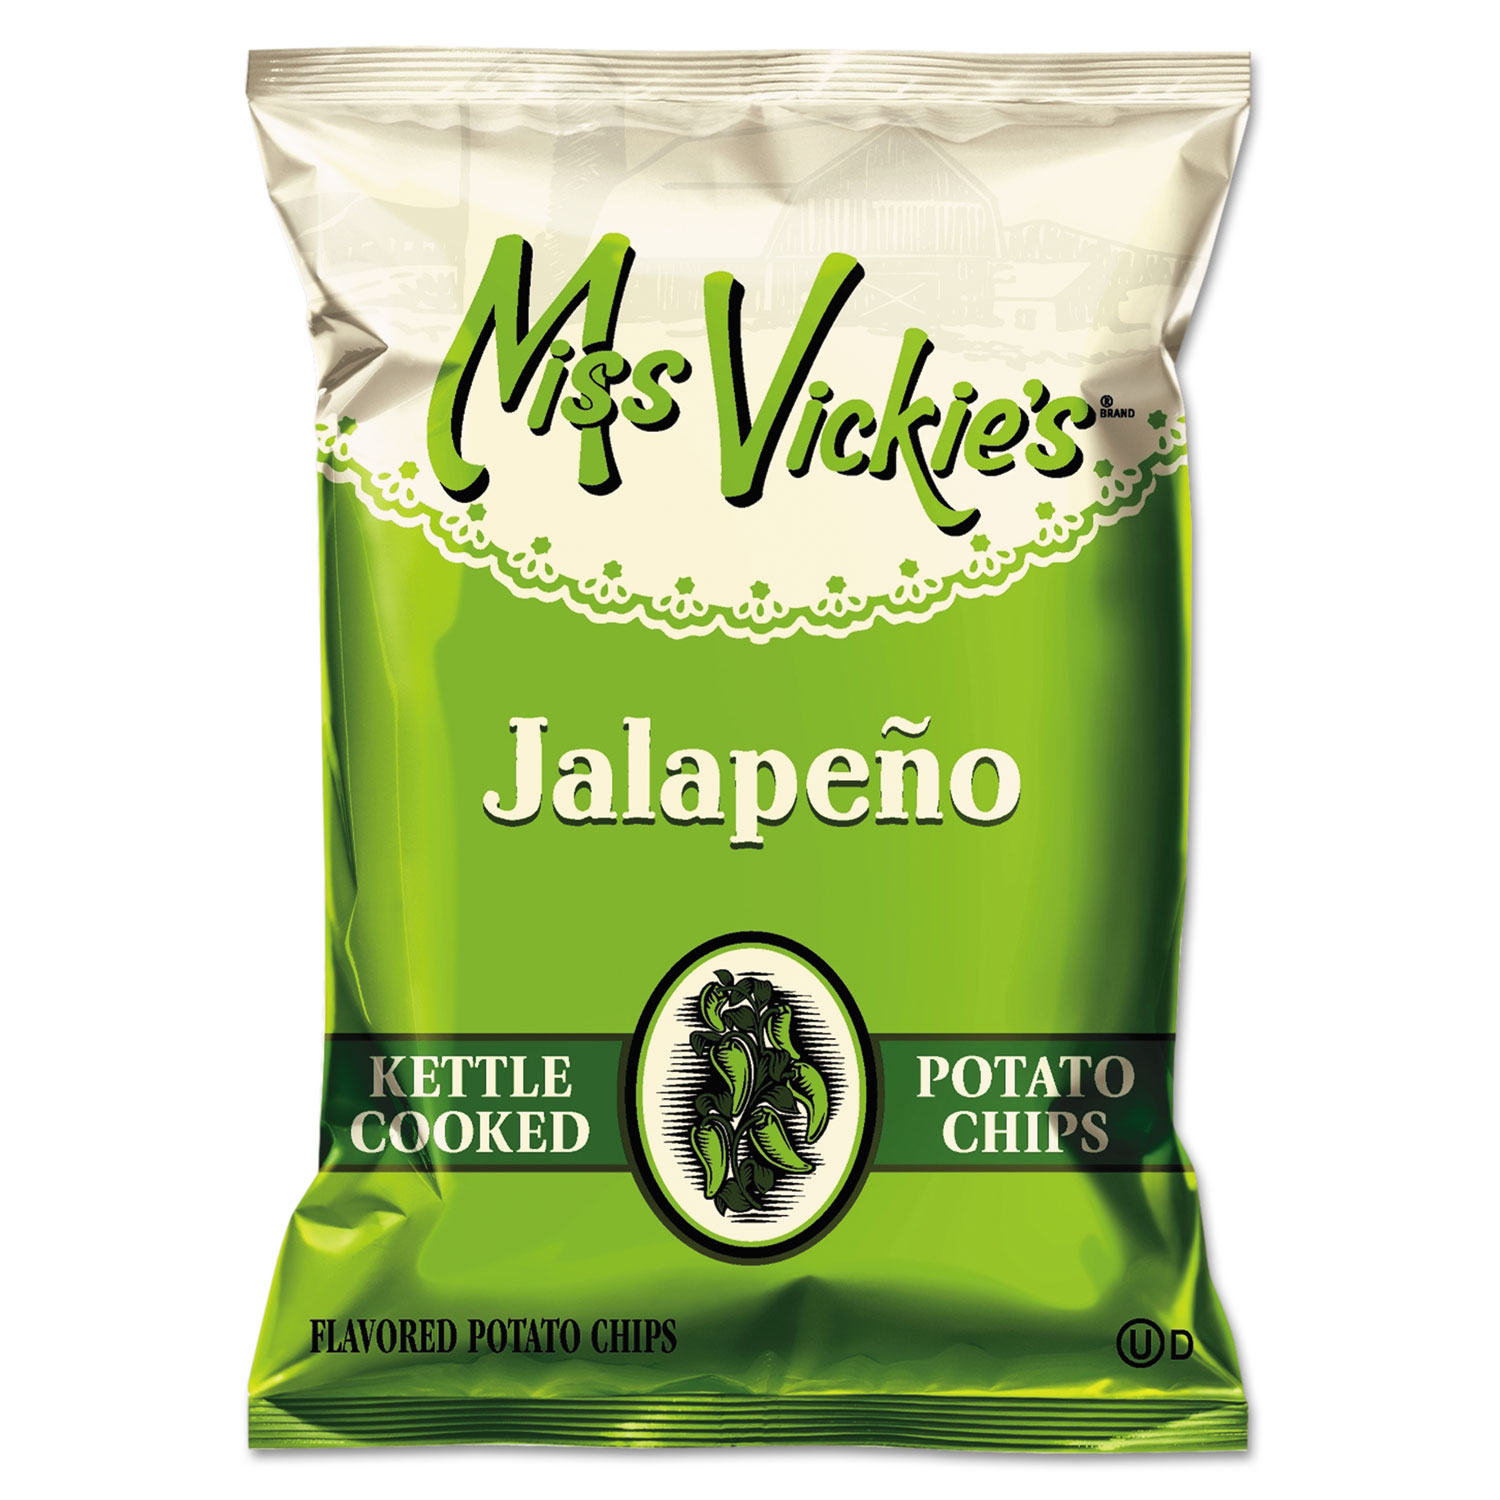  Miss Vickie's 44441 Kettle Cooked Jalapeno Potato Chips, 1.375 oz Bag, 64/Carton (LAY44441) 